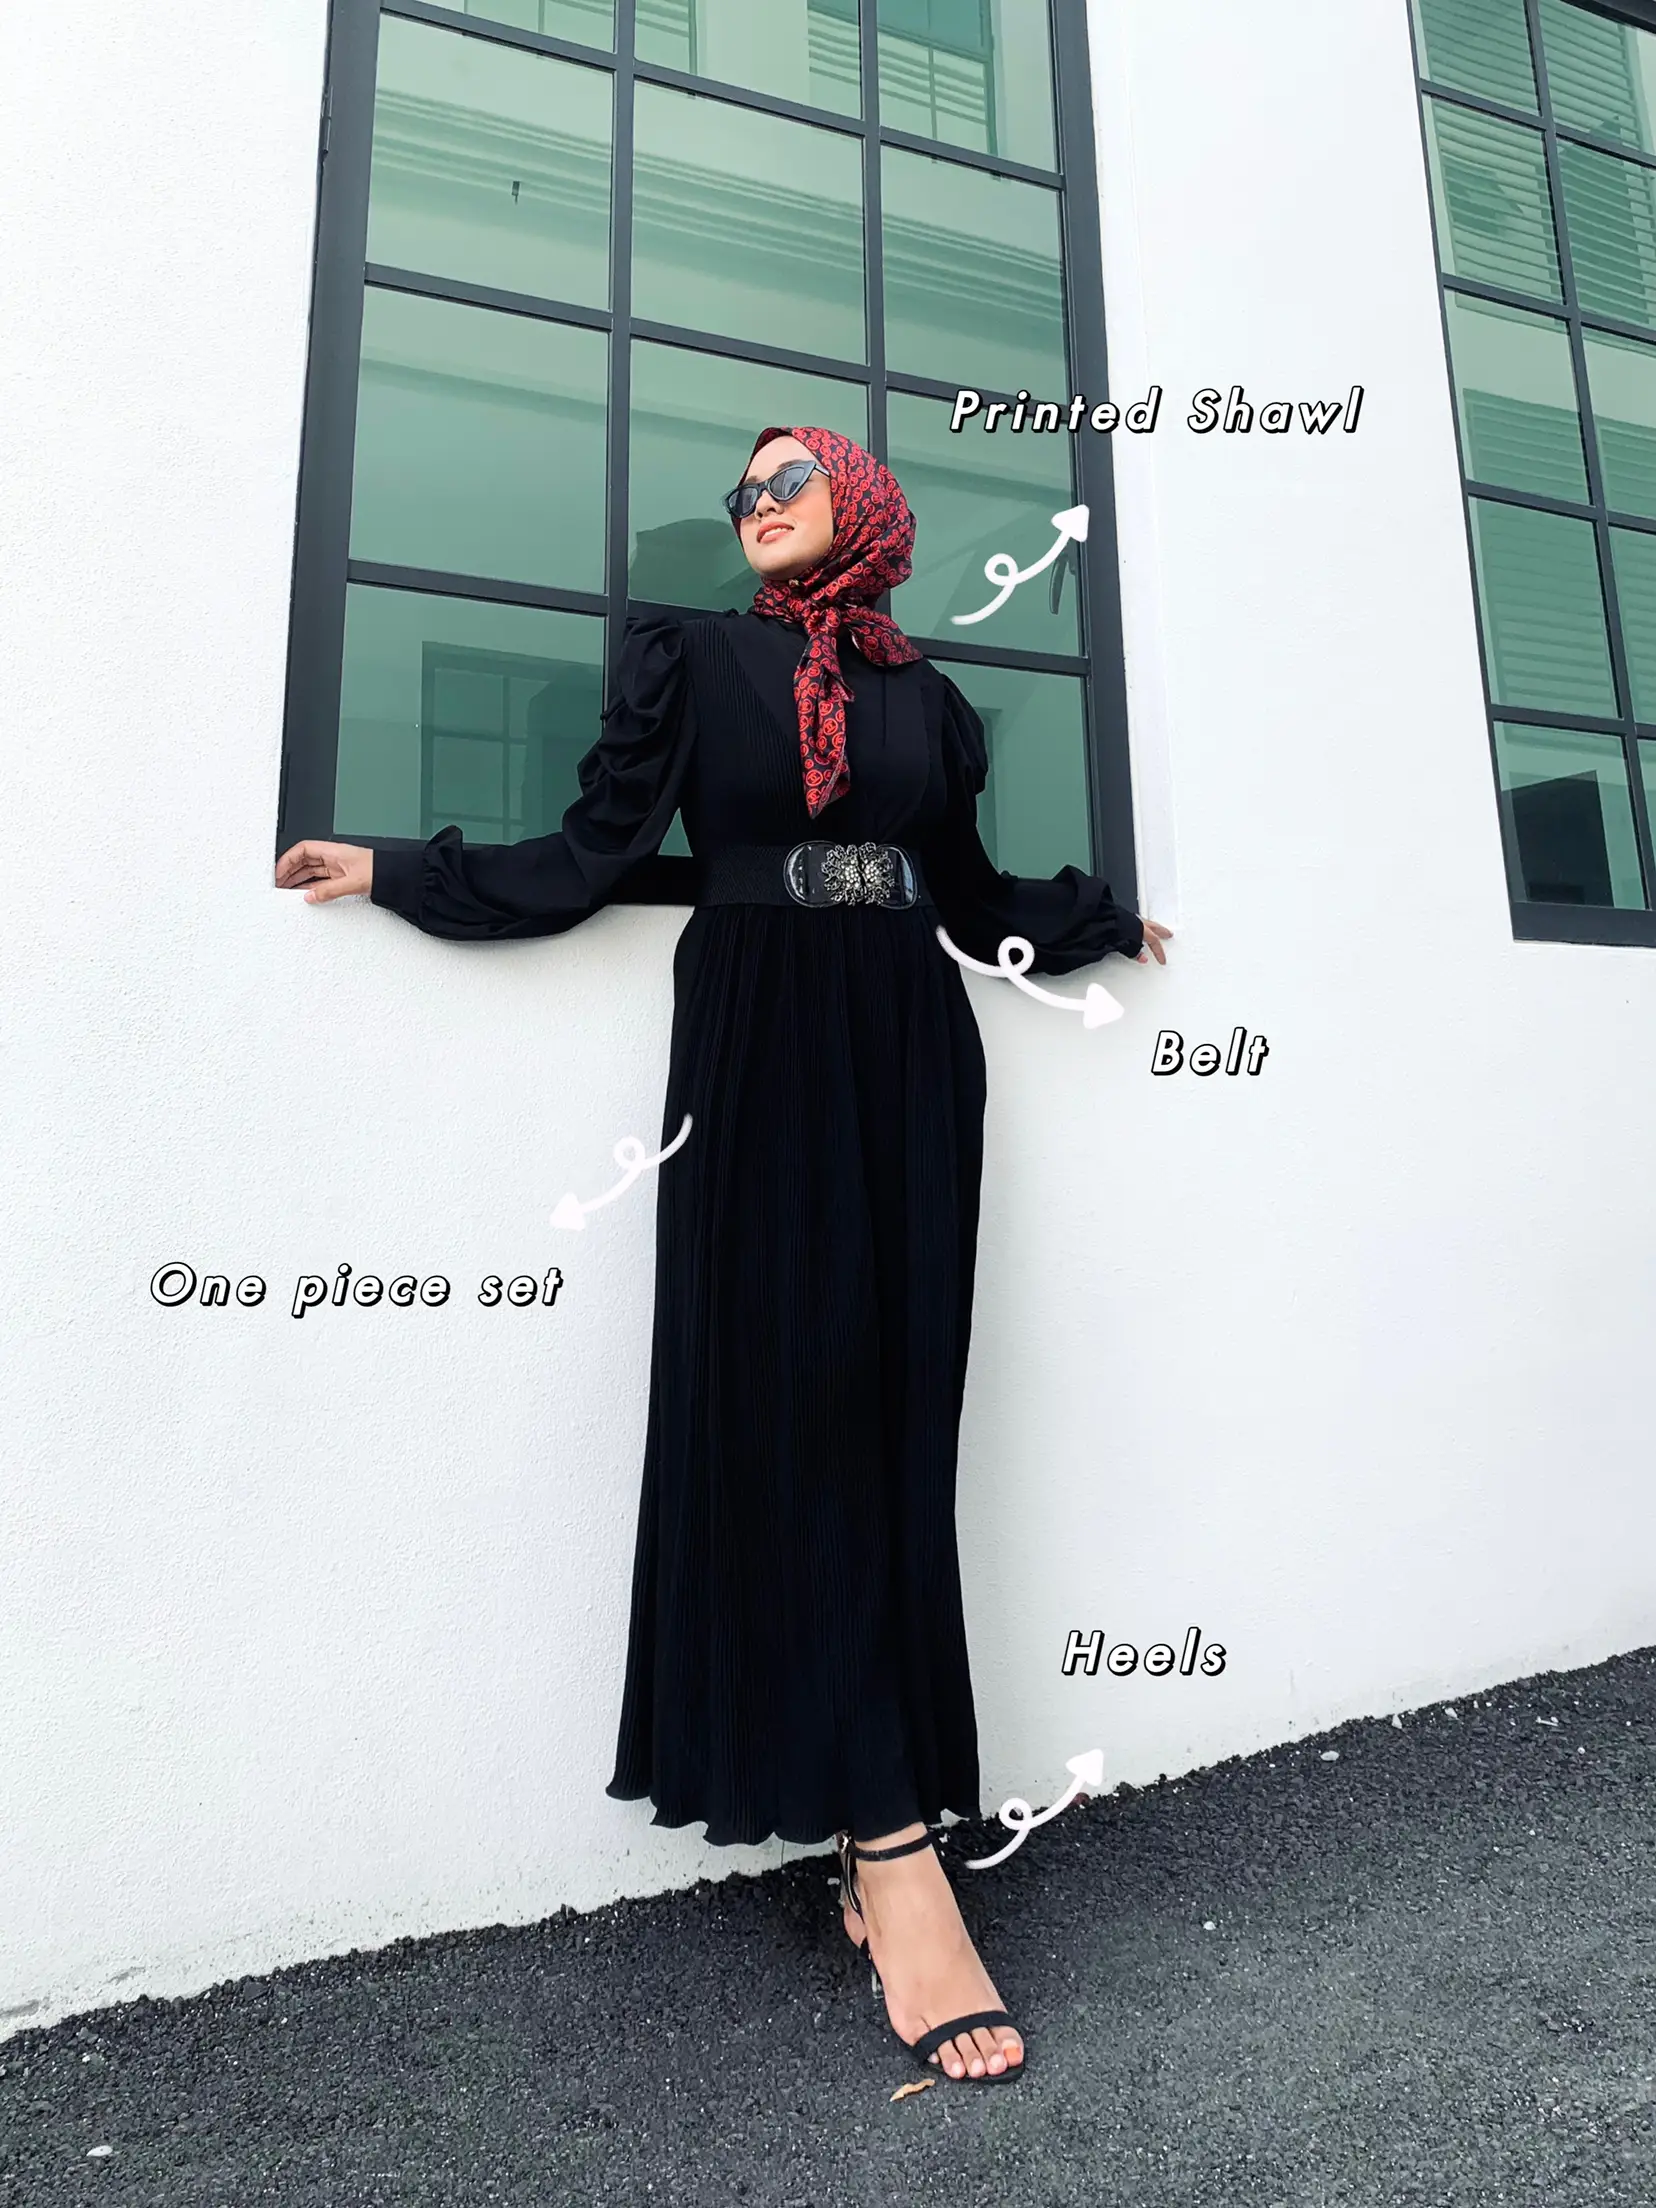 BLACK RED RETRO OUTFIT 🖤❤️ | Gallery posted by Puteri | Lemon8